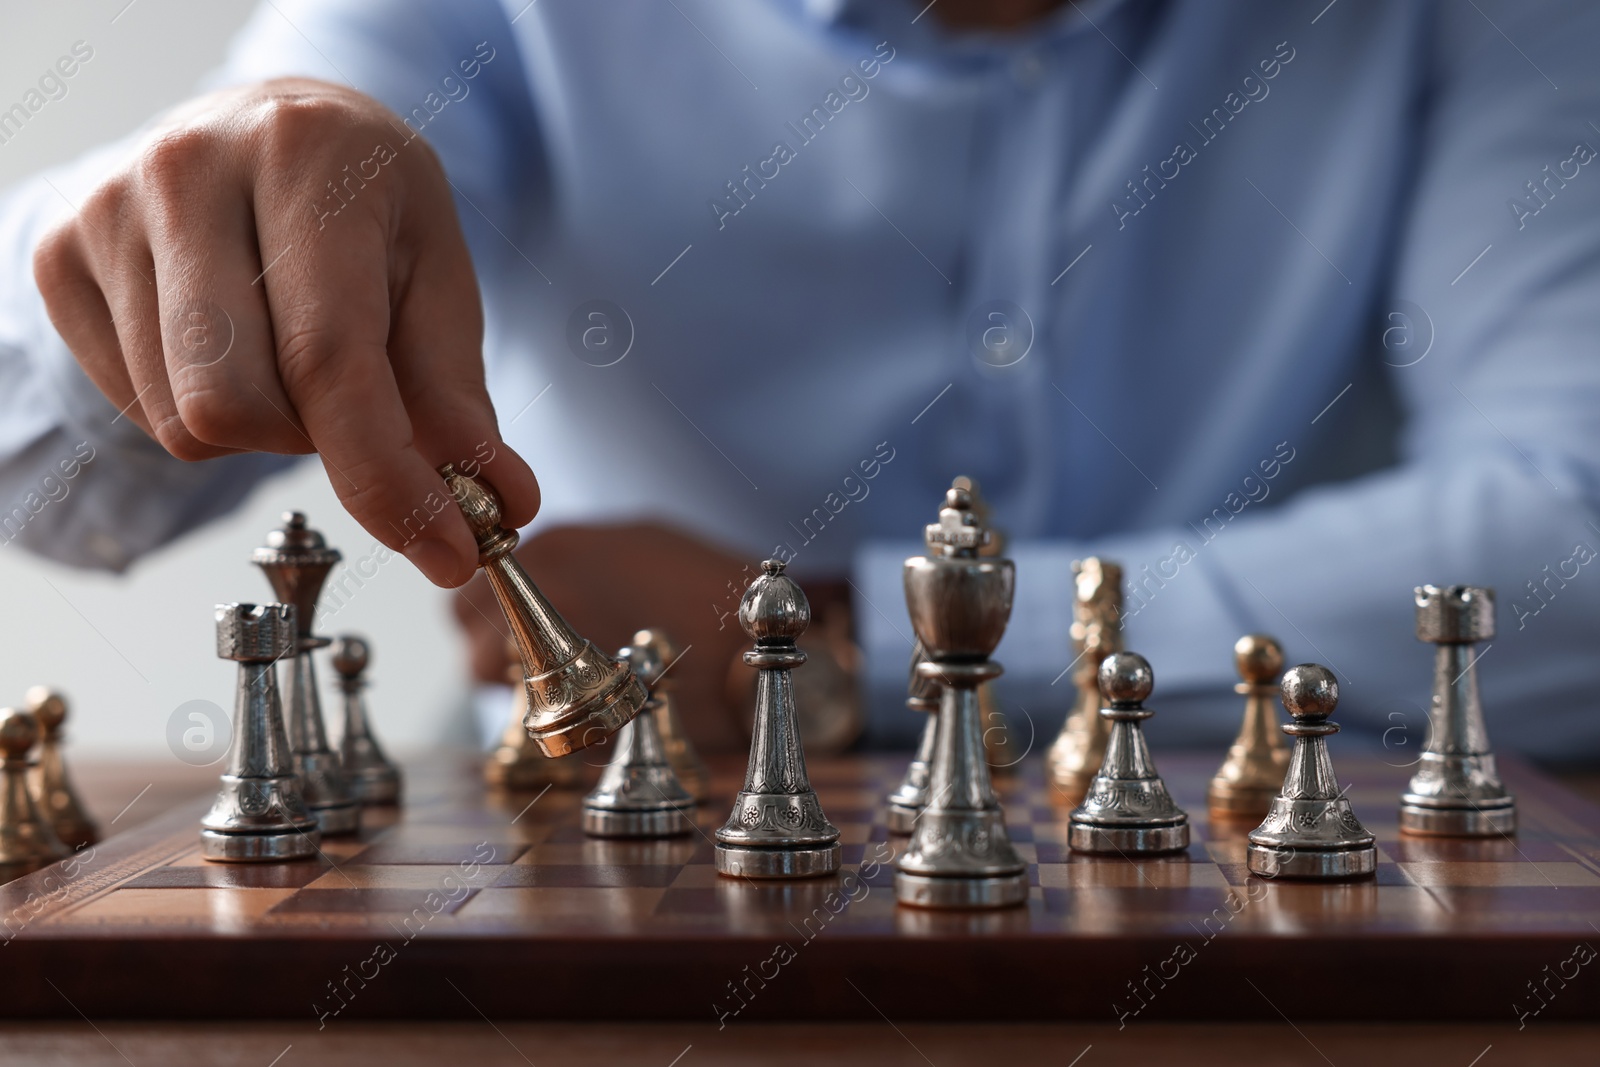 Photo of Man playing chess during tournament at chessboard, closeup